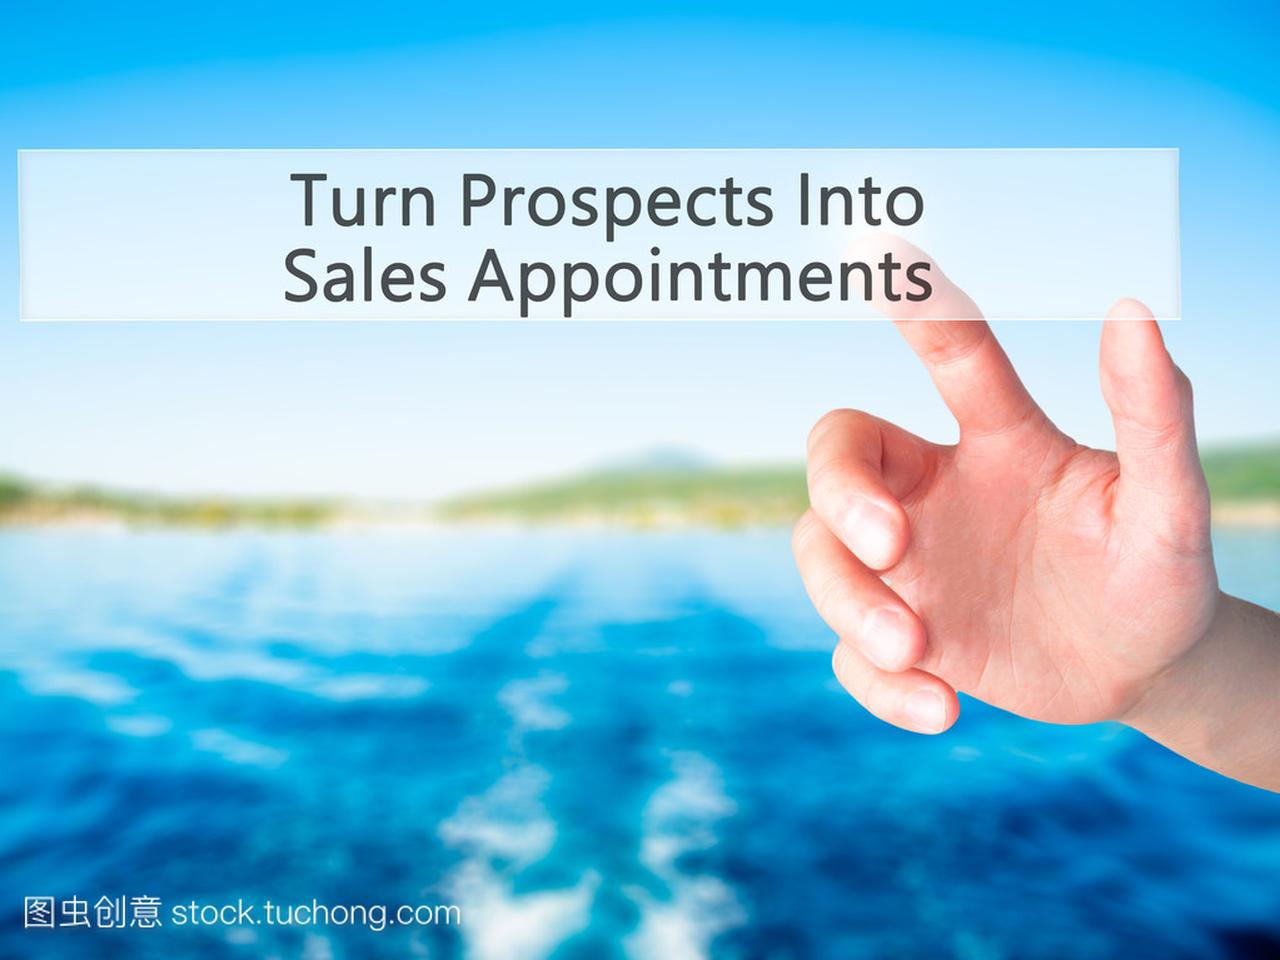 Turn Prospects Into Sales Appointments - Hand